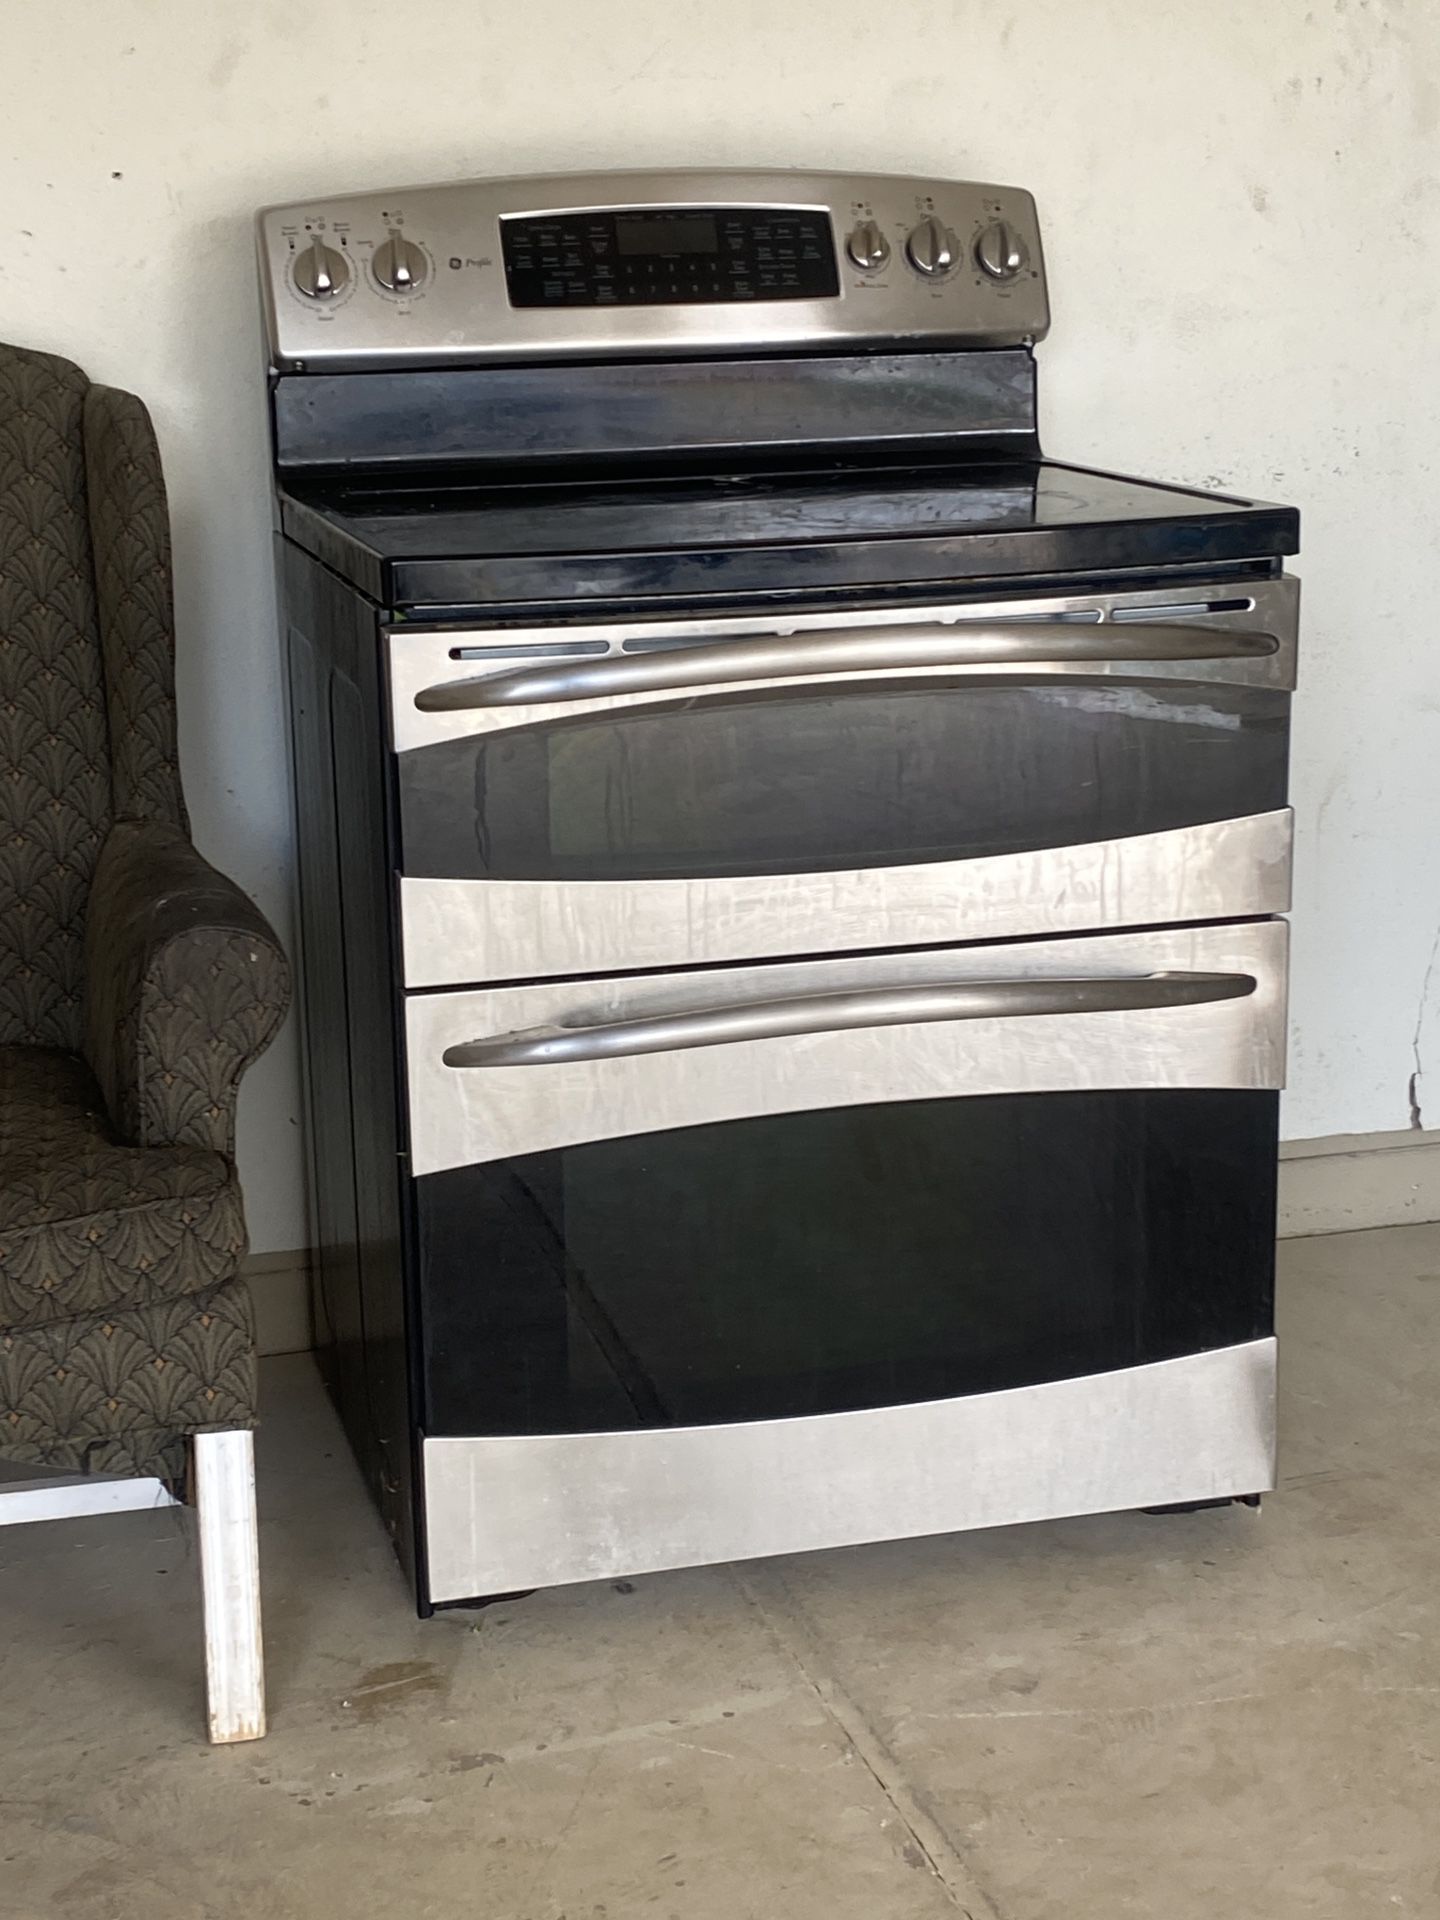 Stoves $20